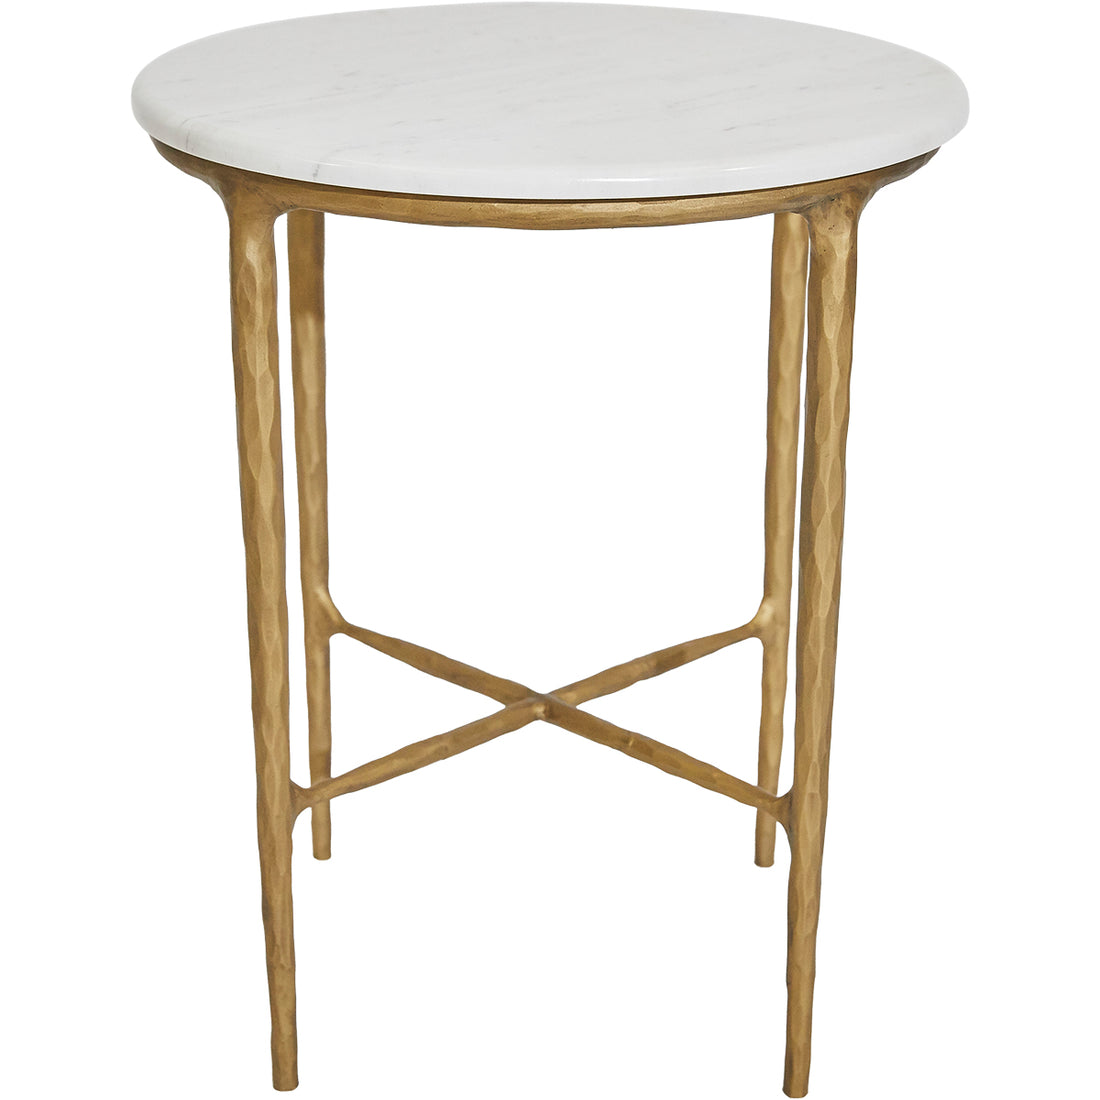 Heston Round Marble Side Table - Brass